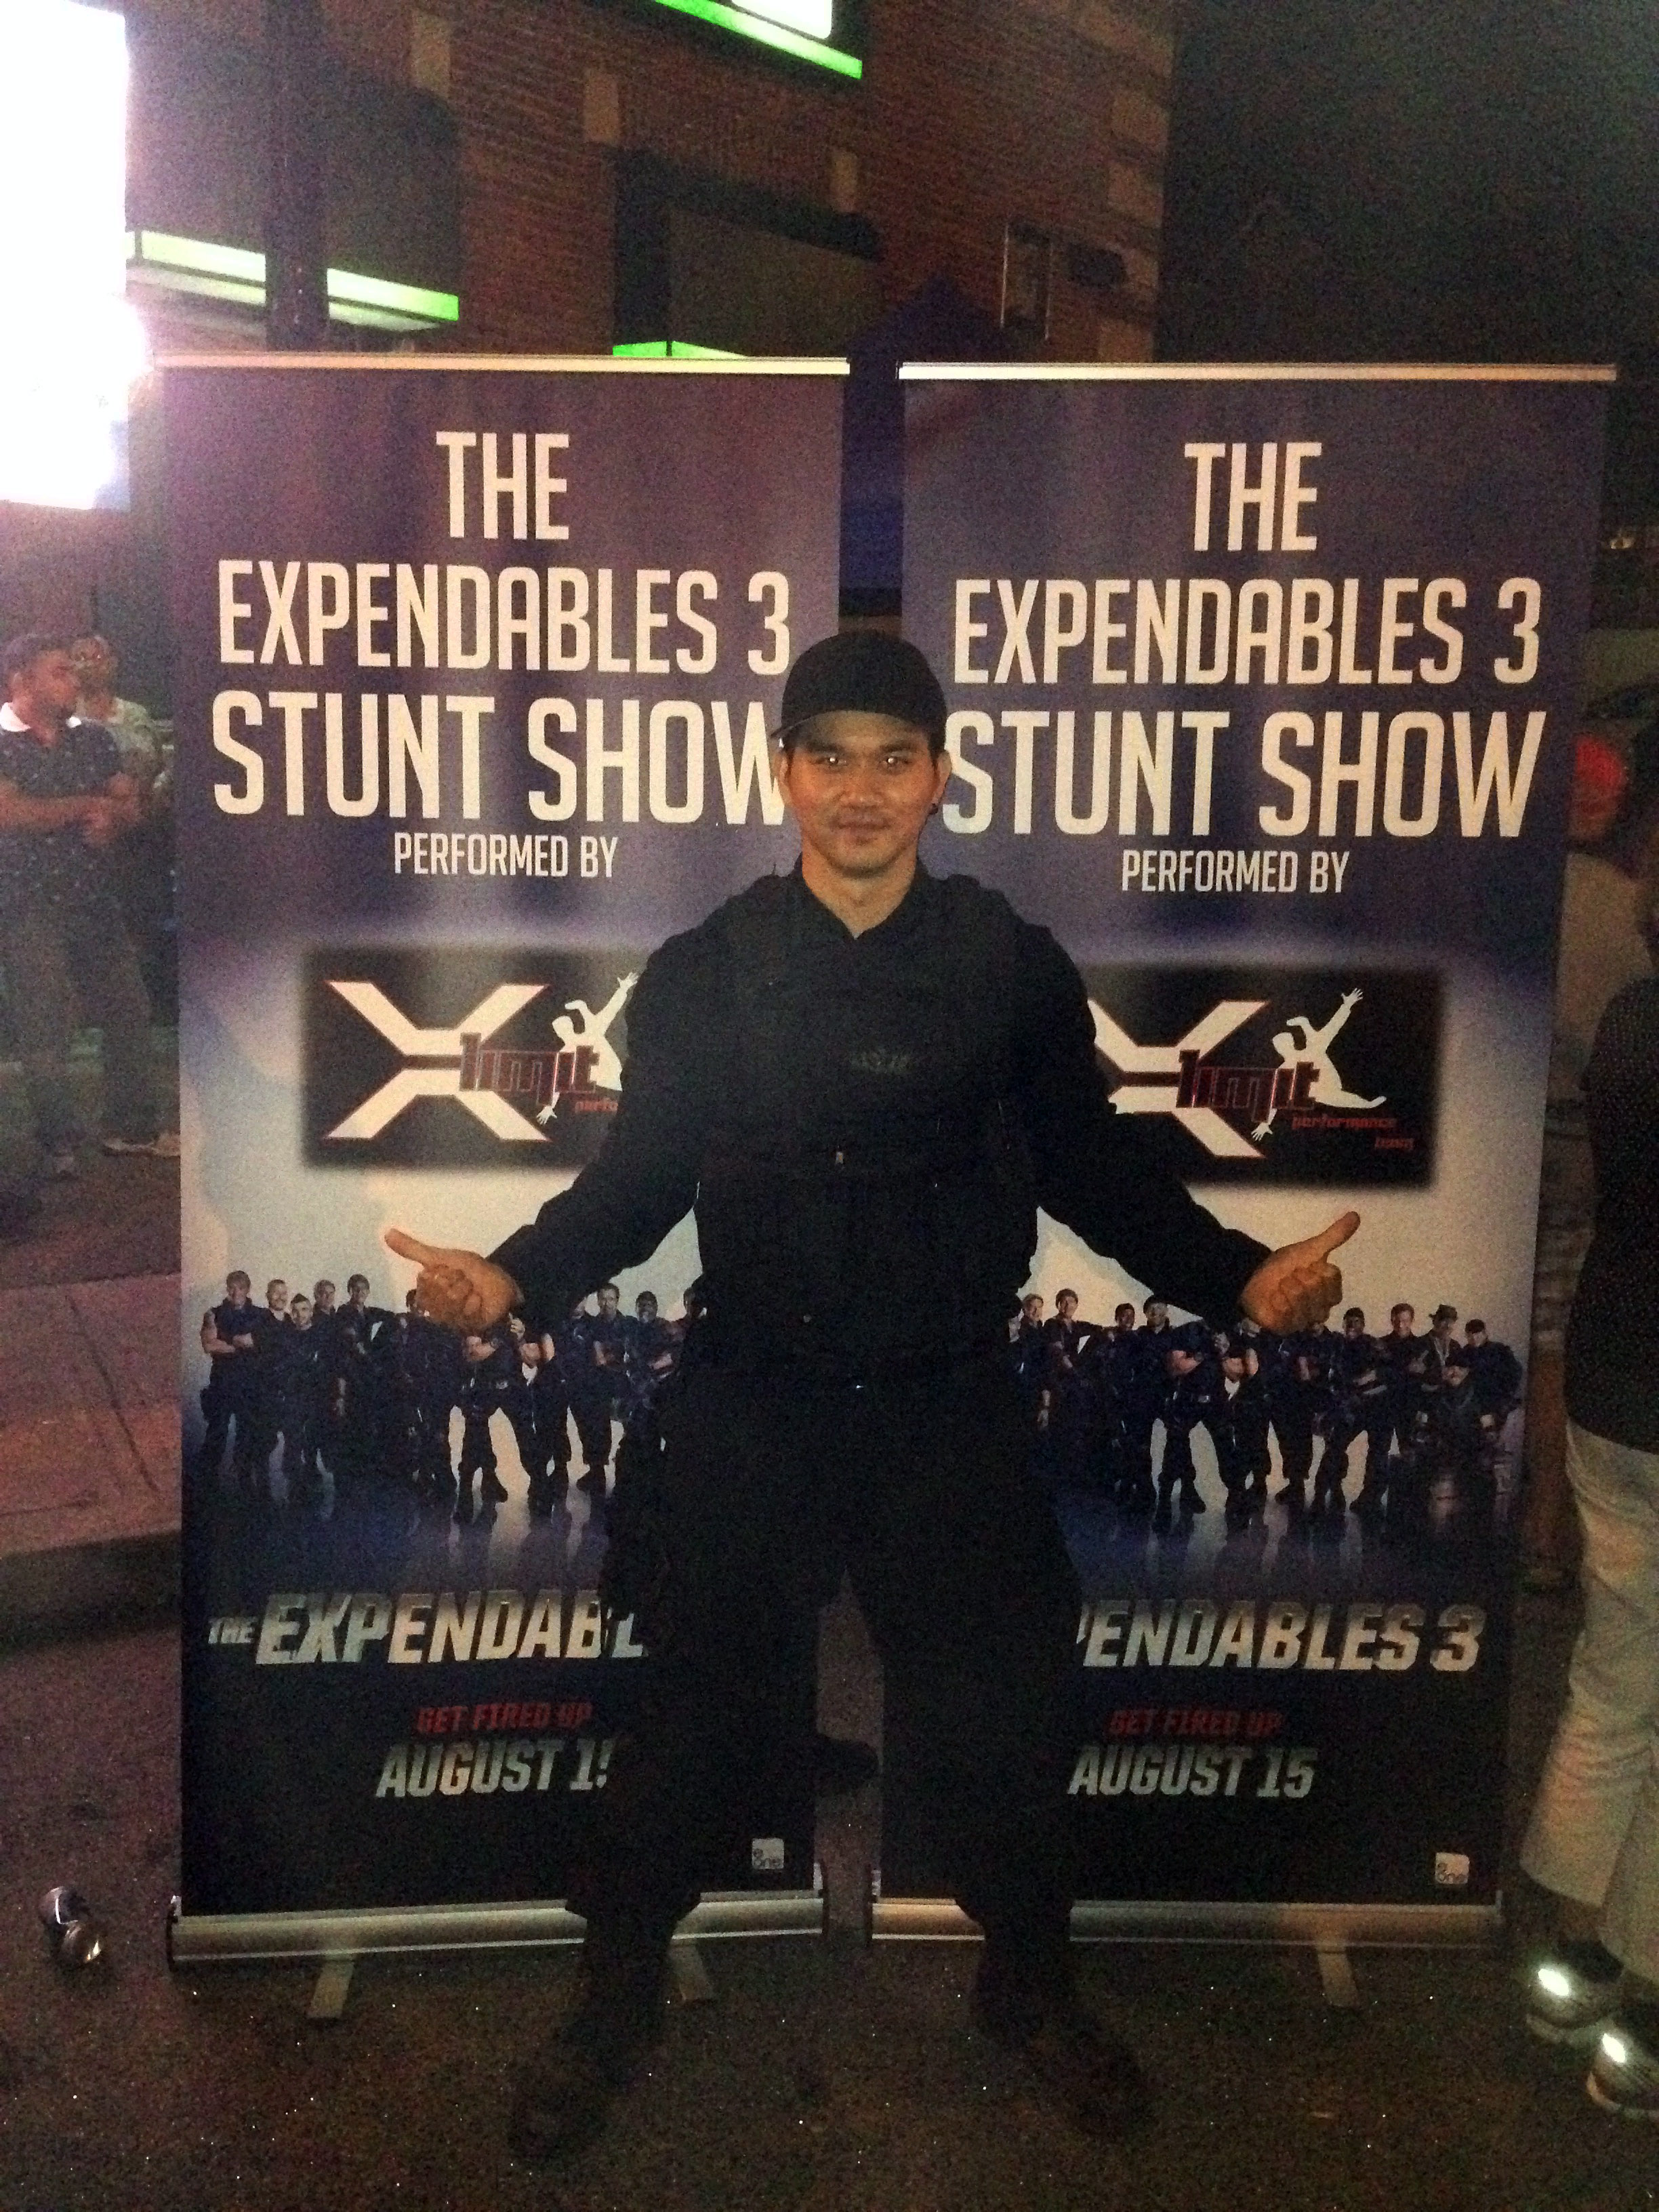 Expendables 3 Live Action Show - X Limit Entertainment Show choreographed by: Phi Huynh Full Video; https://www.youtube.com/watch?v=ABKGyNWNevw